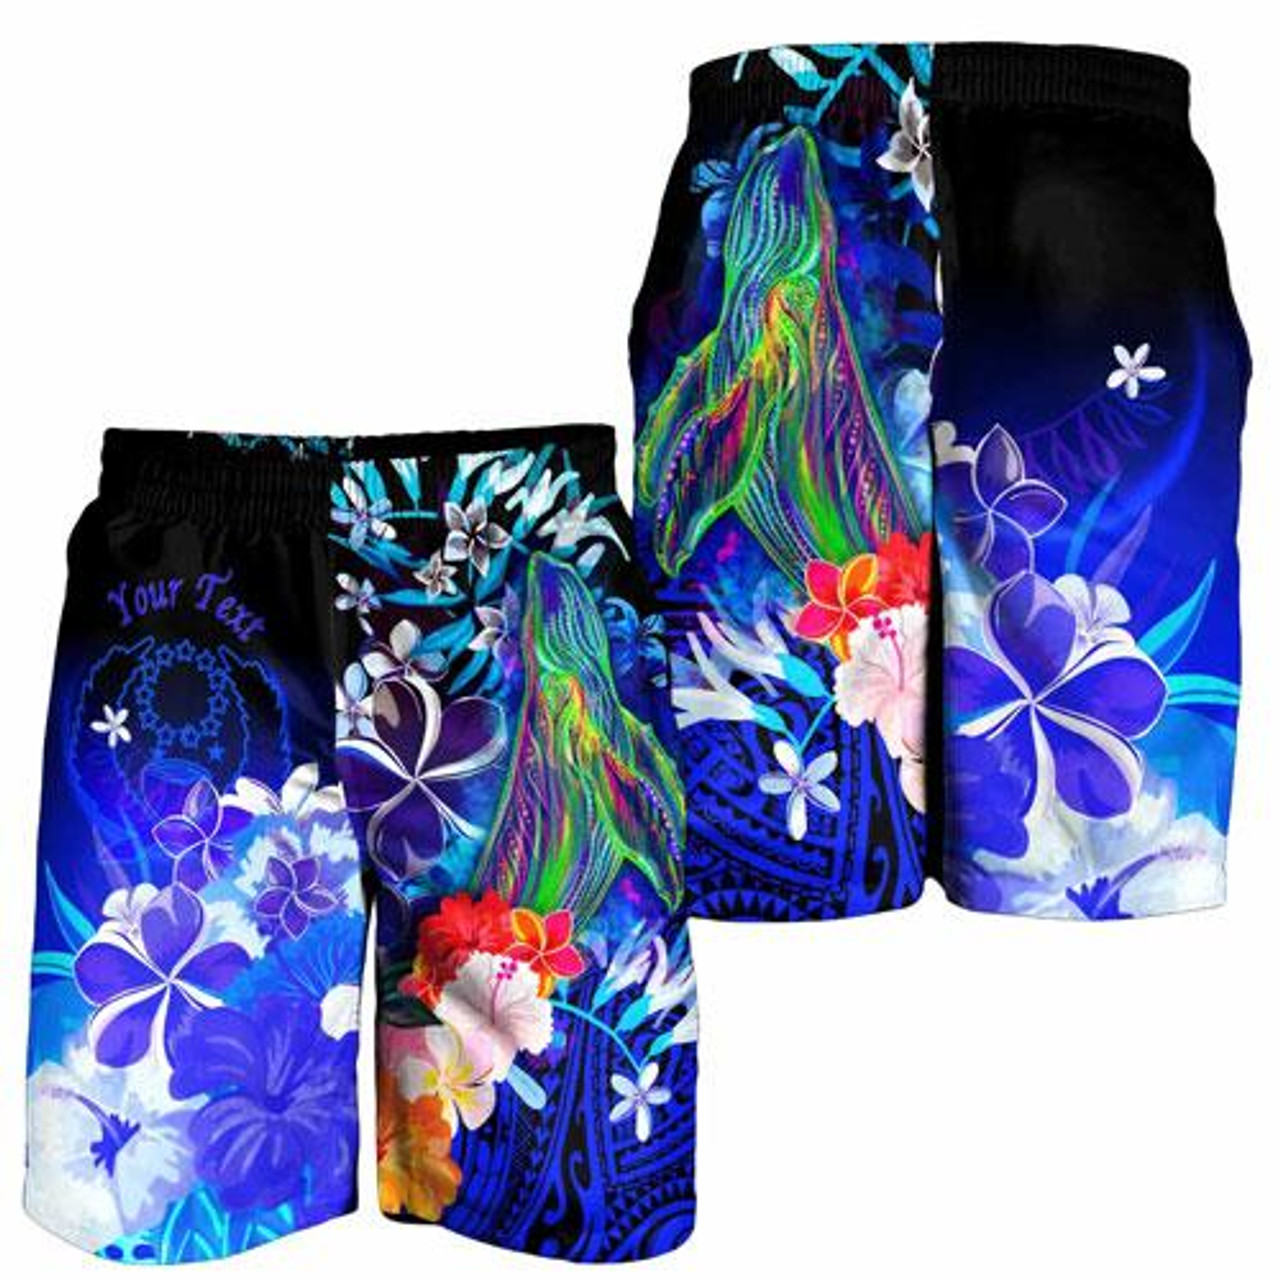 Pohnpei Custom Personalised Men Shorts - Humpback Whale with Tropical Flowers (Blue) 4